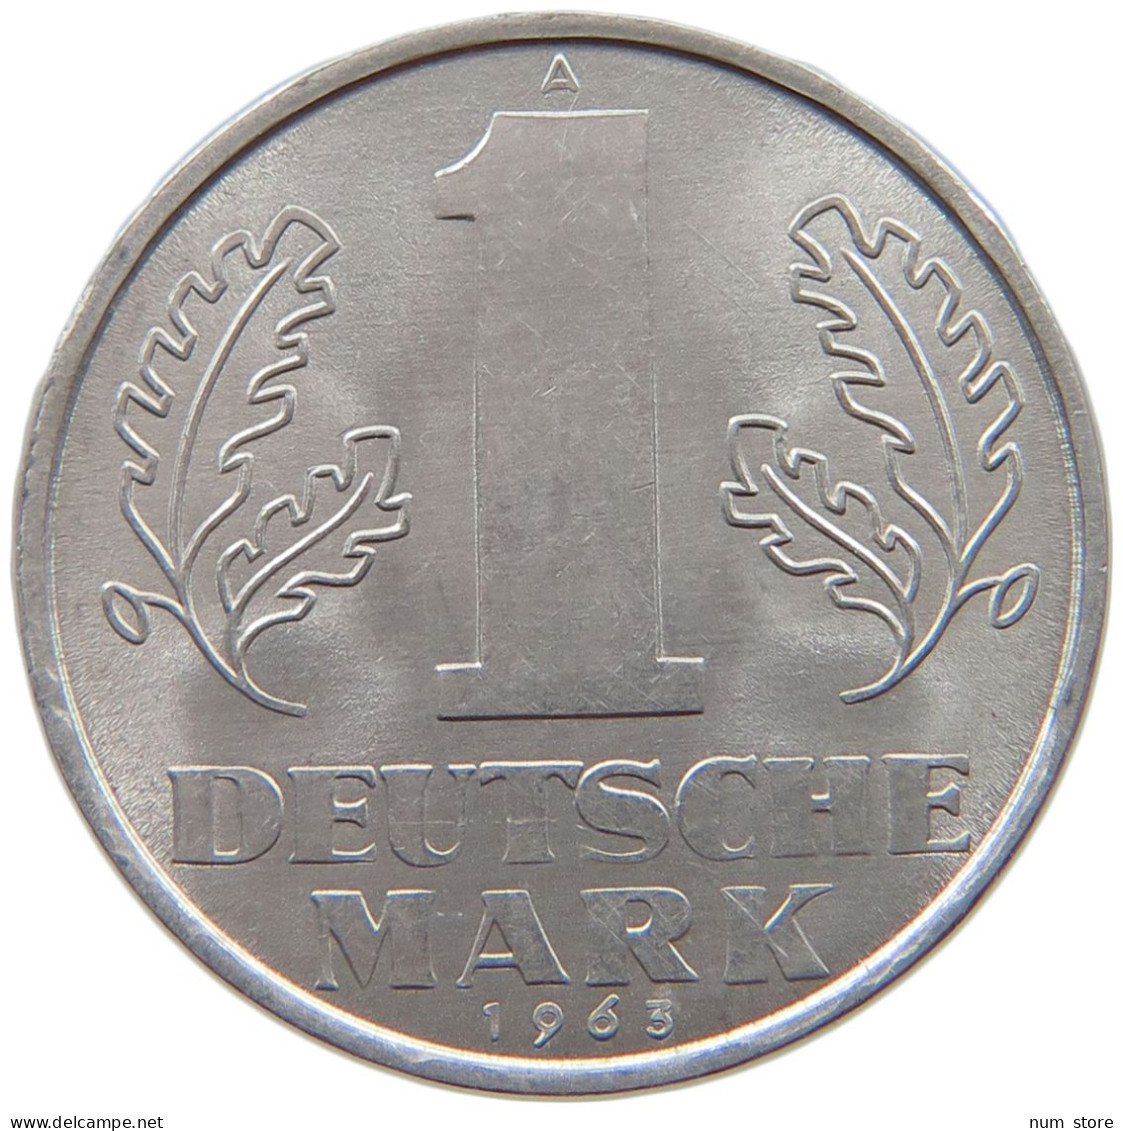 GERMANY DDR MARK 1963  #a076 0269 - 1 Marco